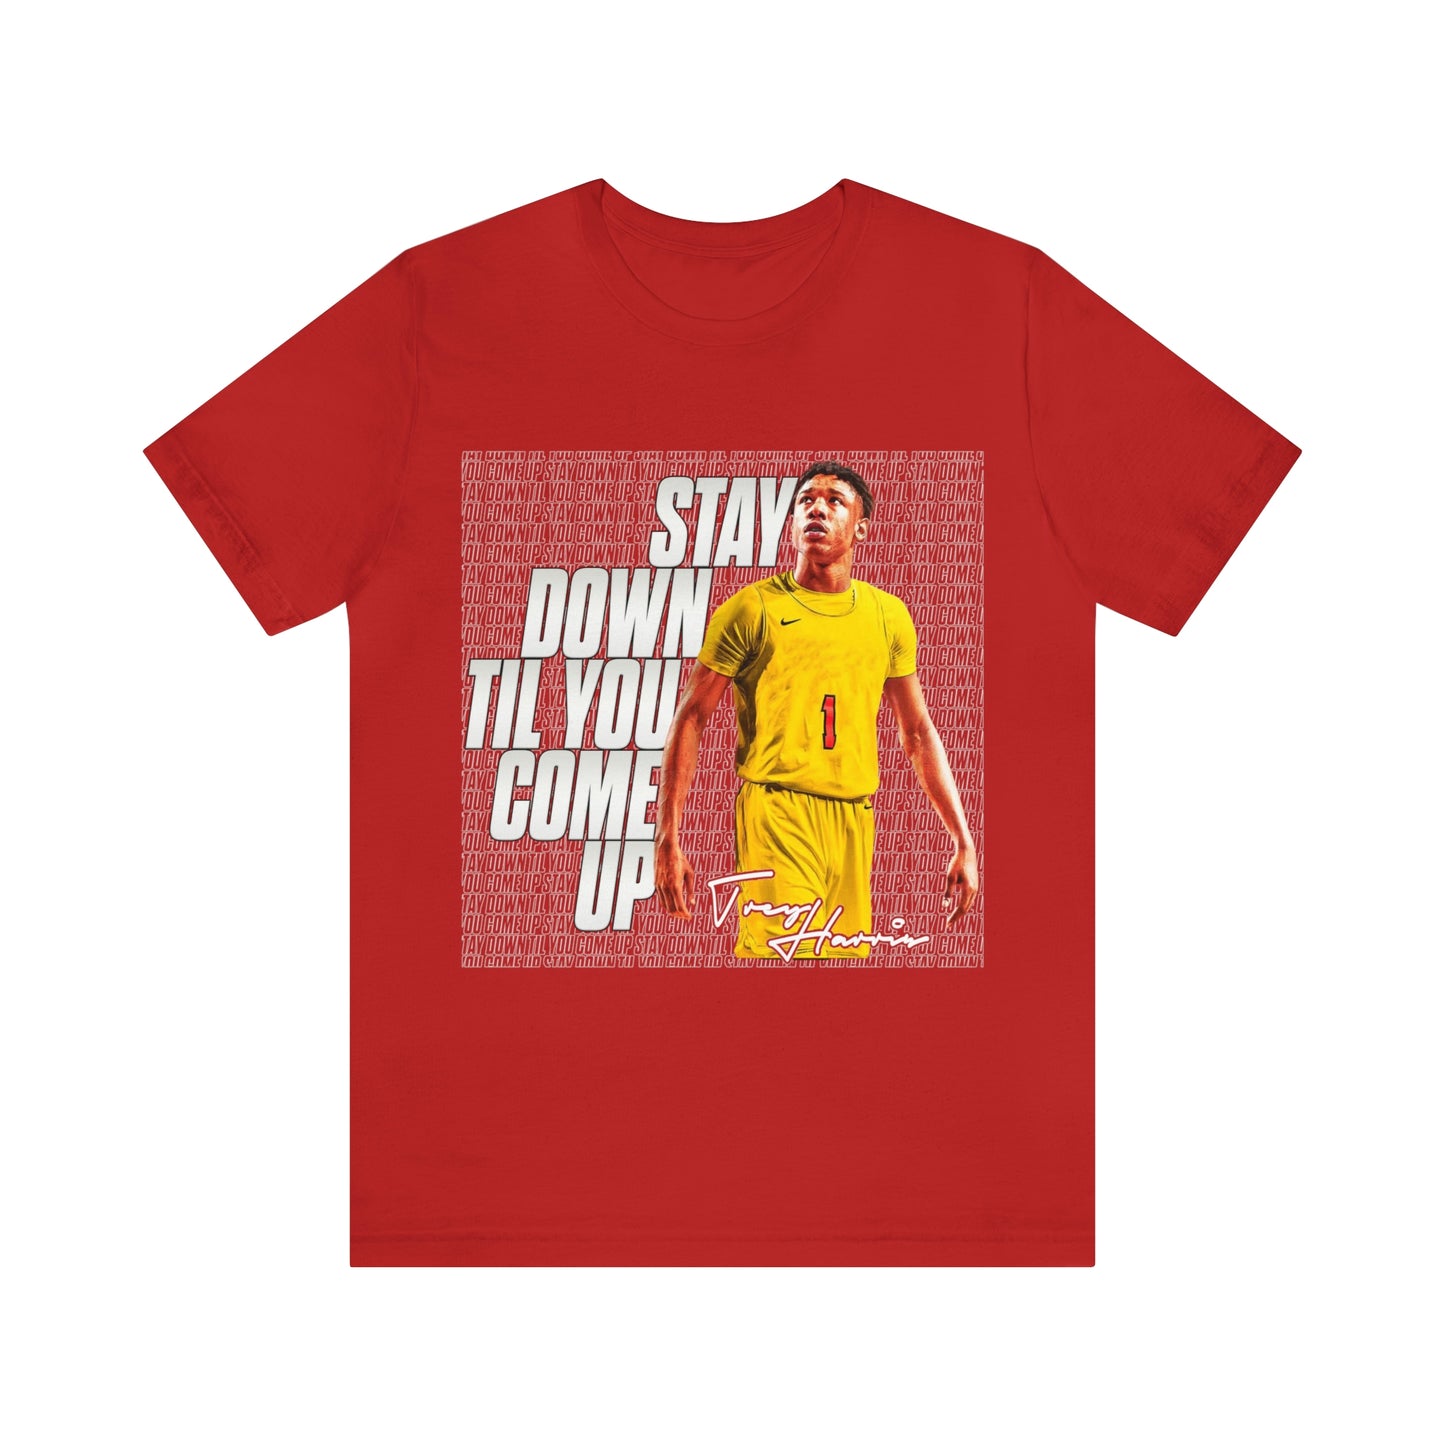 Trey Harris: Stay Down Til You Come Up Tee